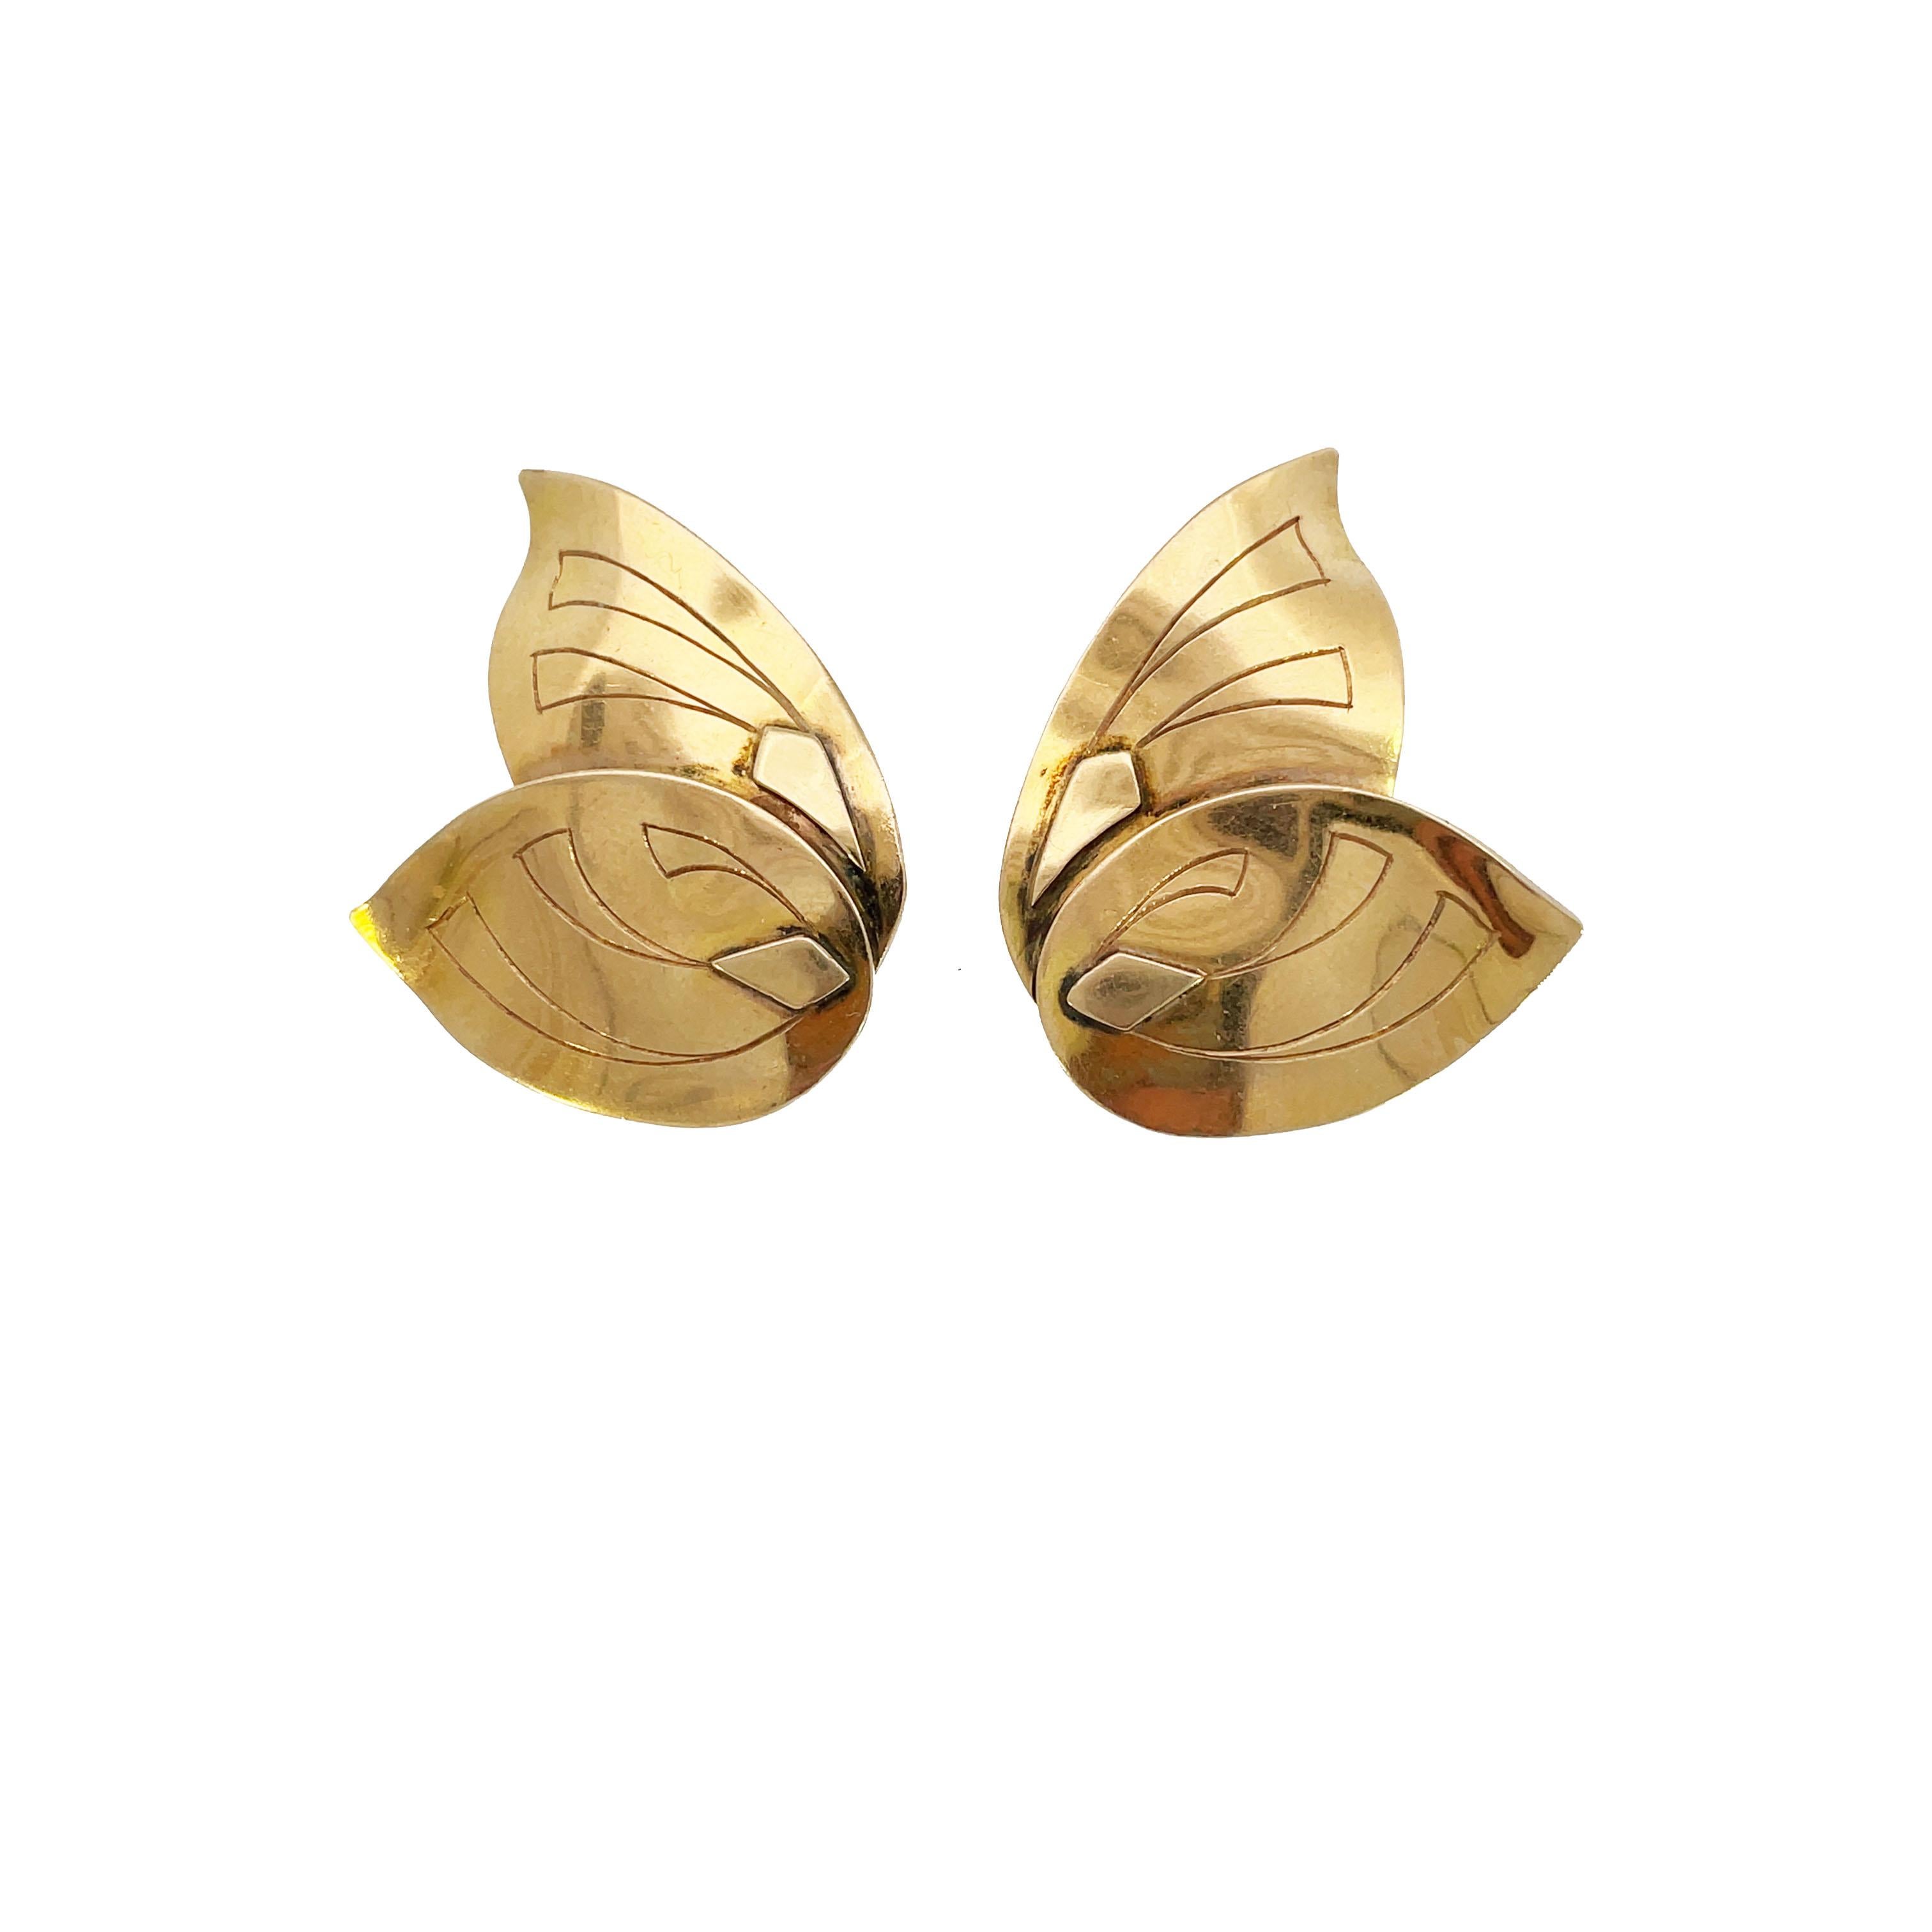 This is an absolutely lovely pair of clip-on earrings from the 1950s fabricated in 14K yellow gold that presents a gorgeous butterfly wing motif! Crafted in gleaming 14K yellow gold, these clip-on earrings would make a timeless addition to any